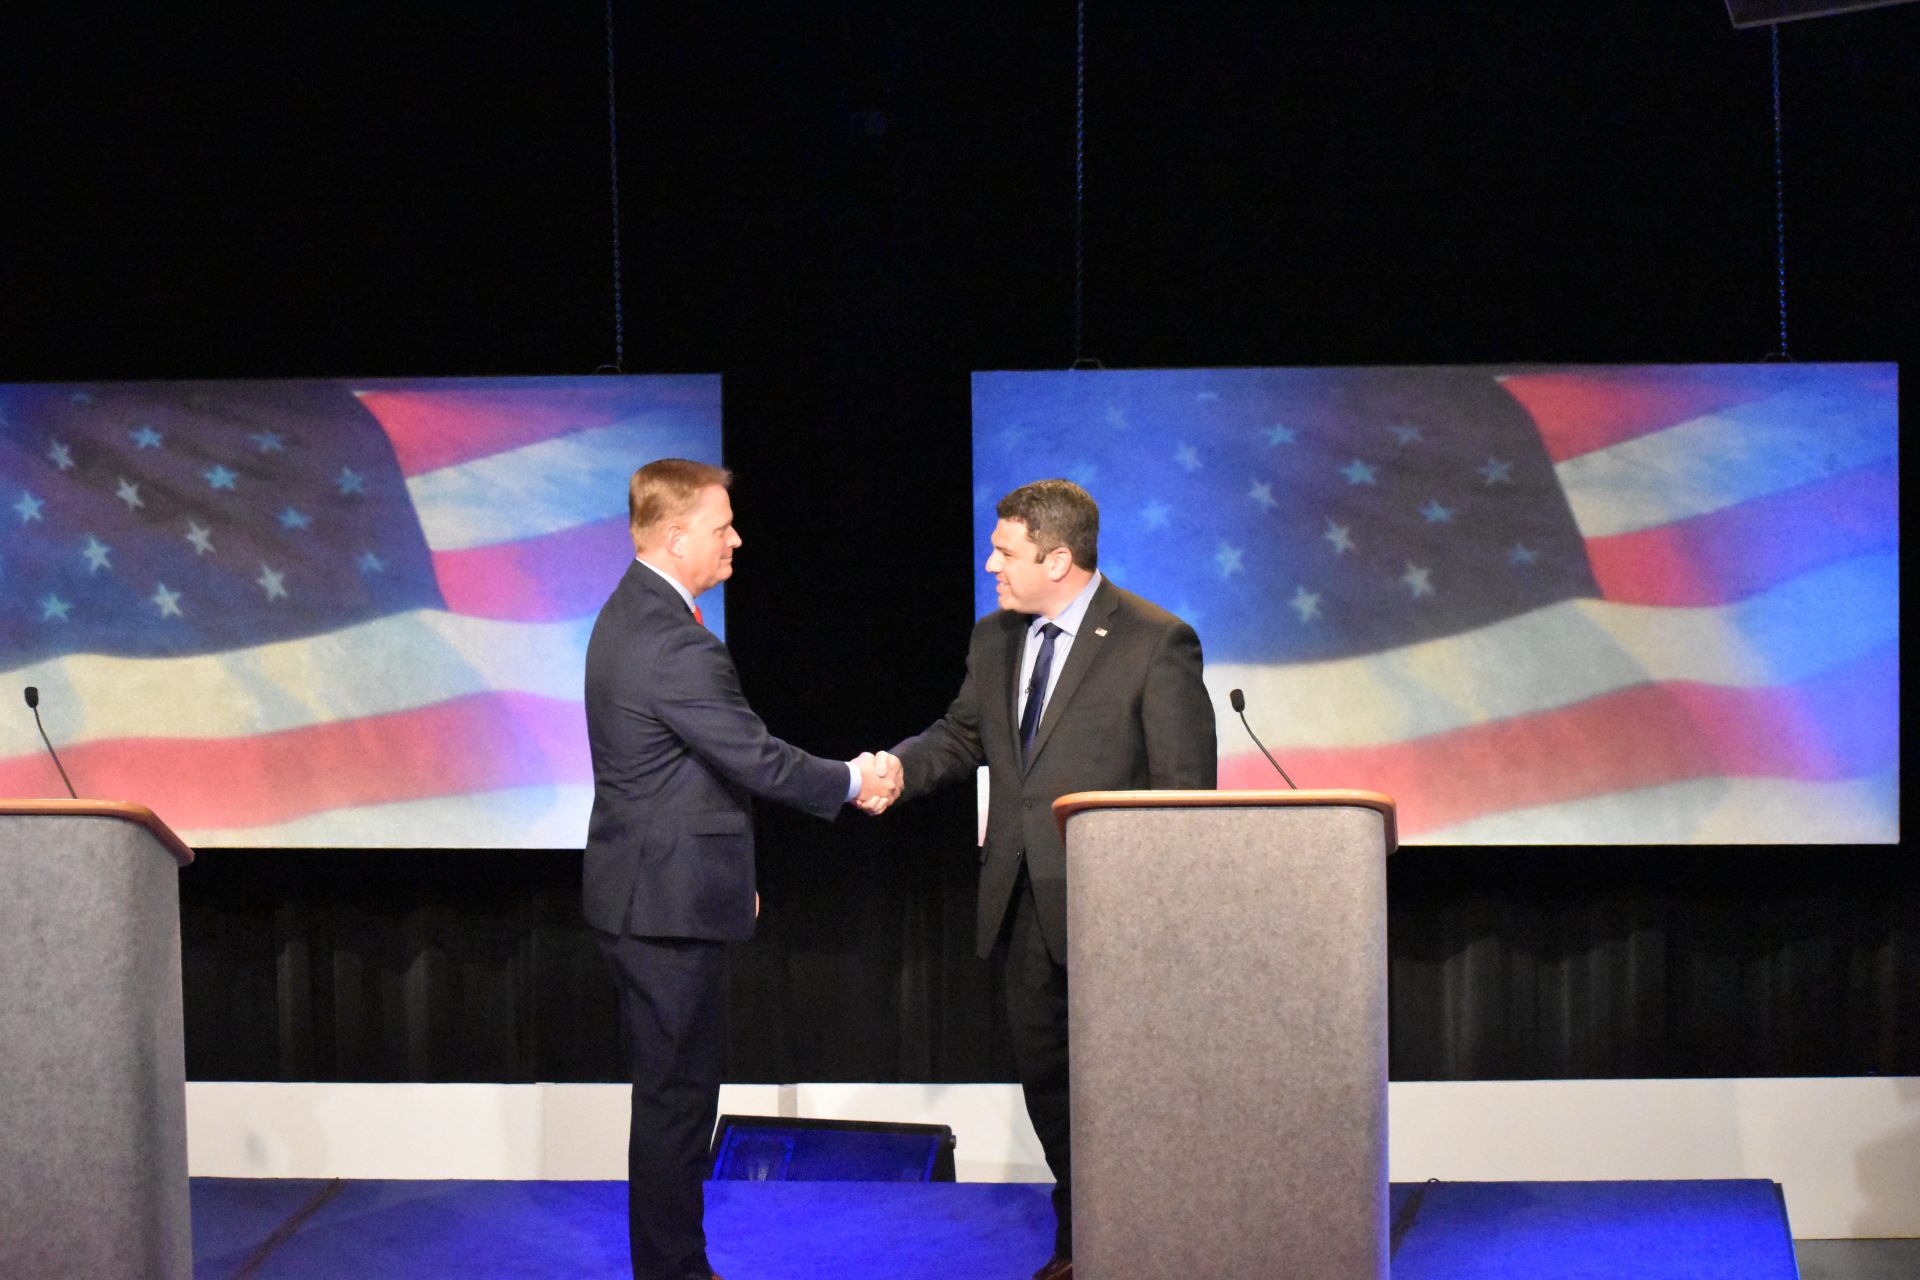 Republican Fred Keller, left, shakes hands with Democrat Marc Friedenberg ahead of a debate for Pennsylvania's 12th congressional district on May 2, 2019.